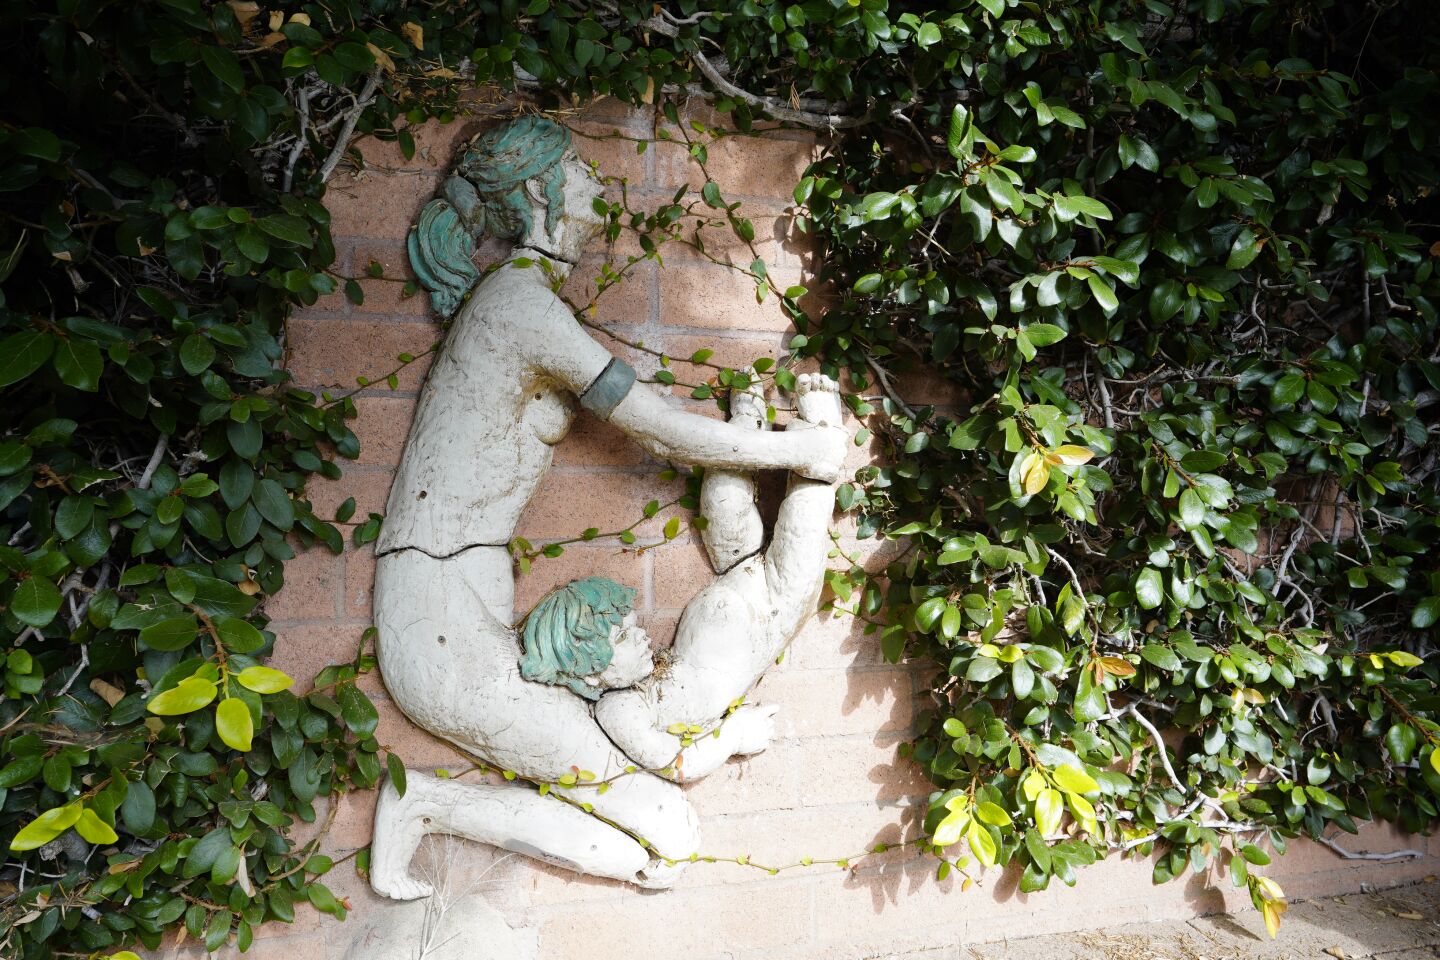 San Diego, California - December 02: The historic home of oceanographer Walter Munk. The swimming pool area displays a figure of a woman and child at La Jolla Shores on Thursday, Dec. 2, 2021 in San Diego, California. (Alejandro Tamayo / The San Diego Union-Tribune)